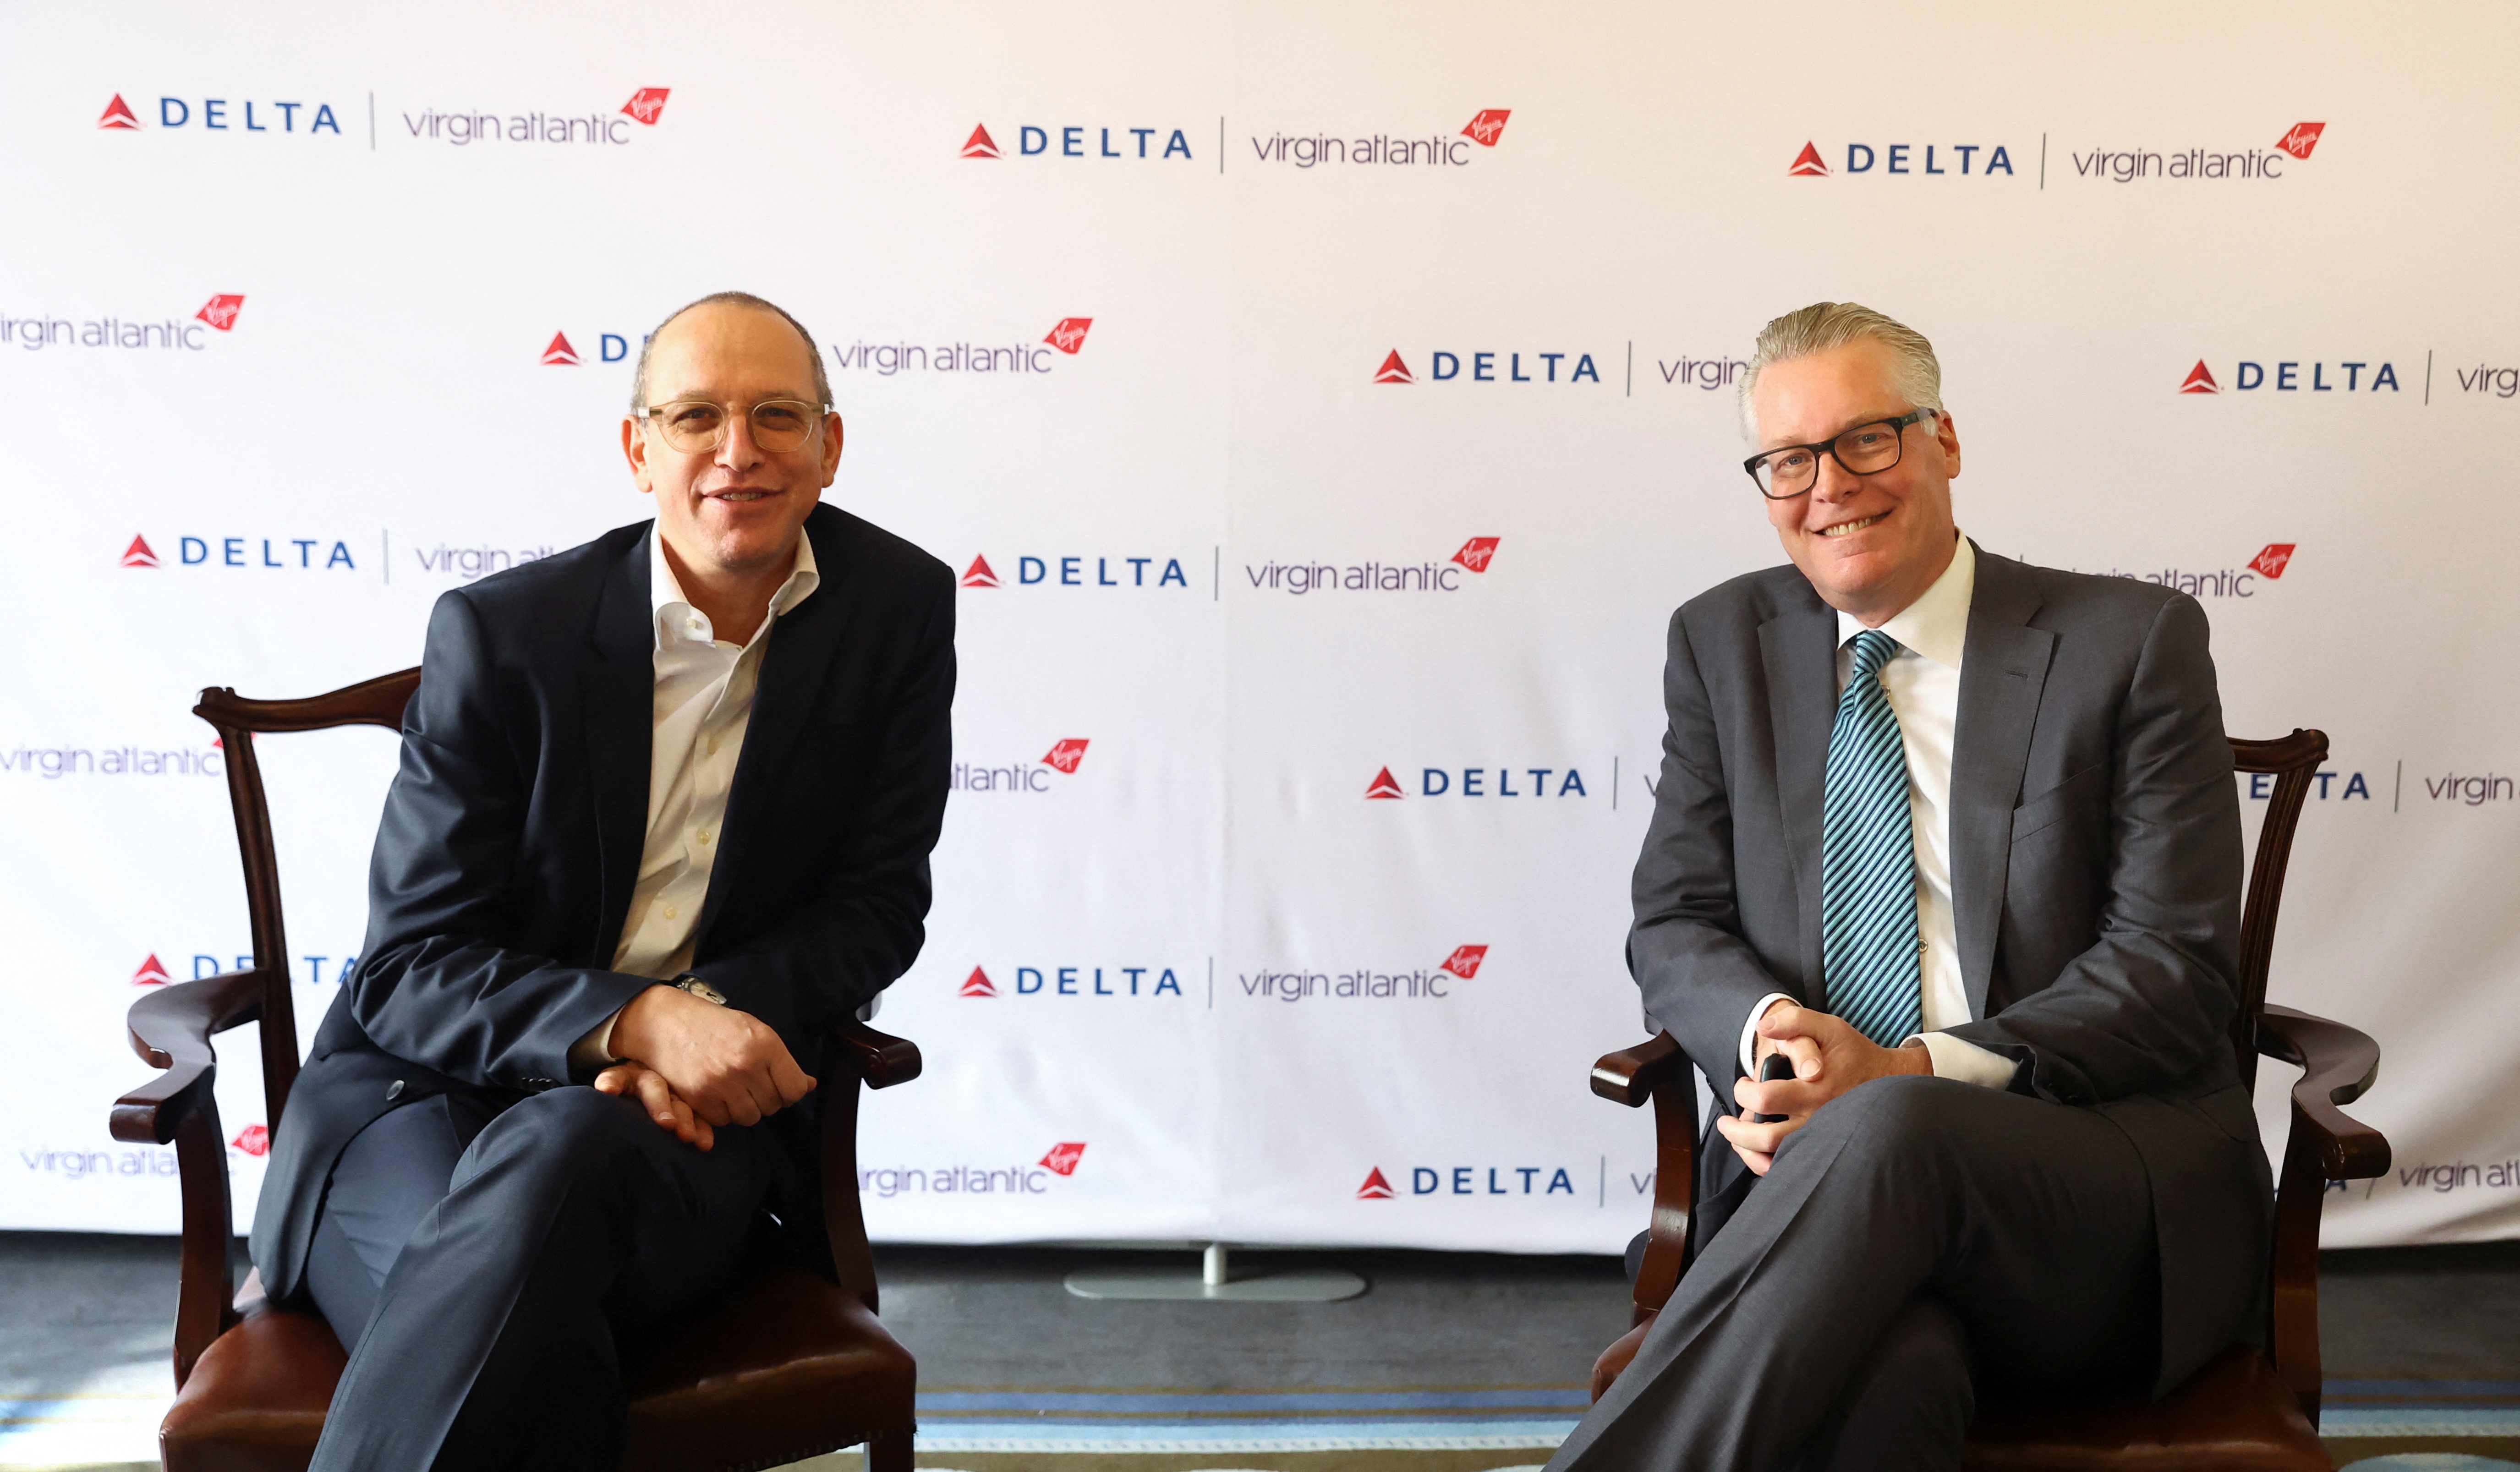 Delta Air Lines and Virgin Atlantic CEOs meet to discuss international travel, in London